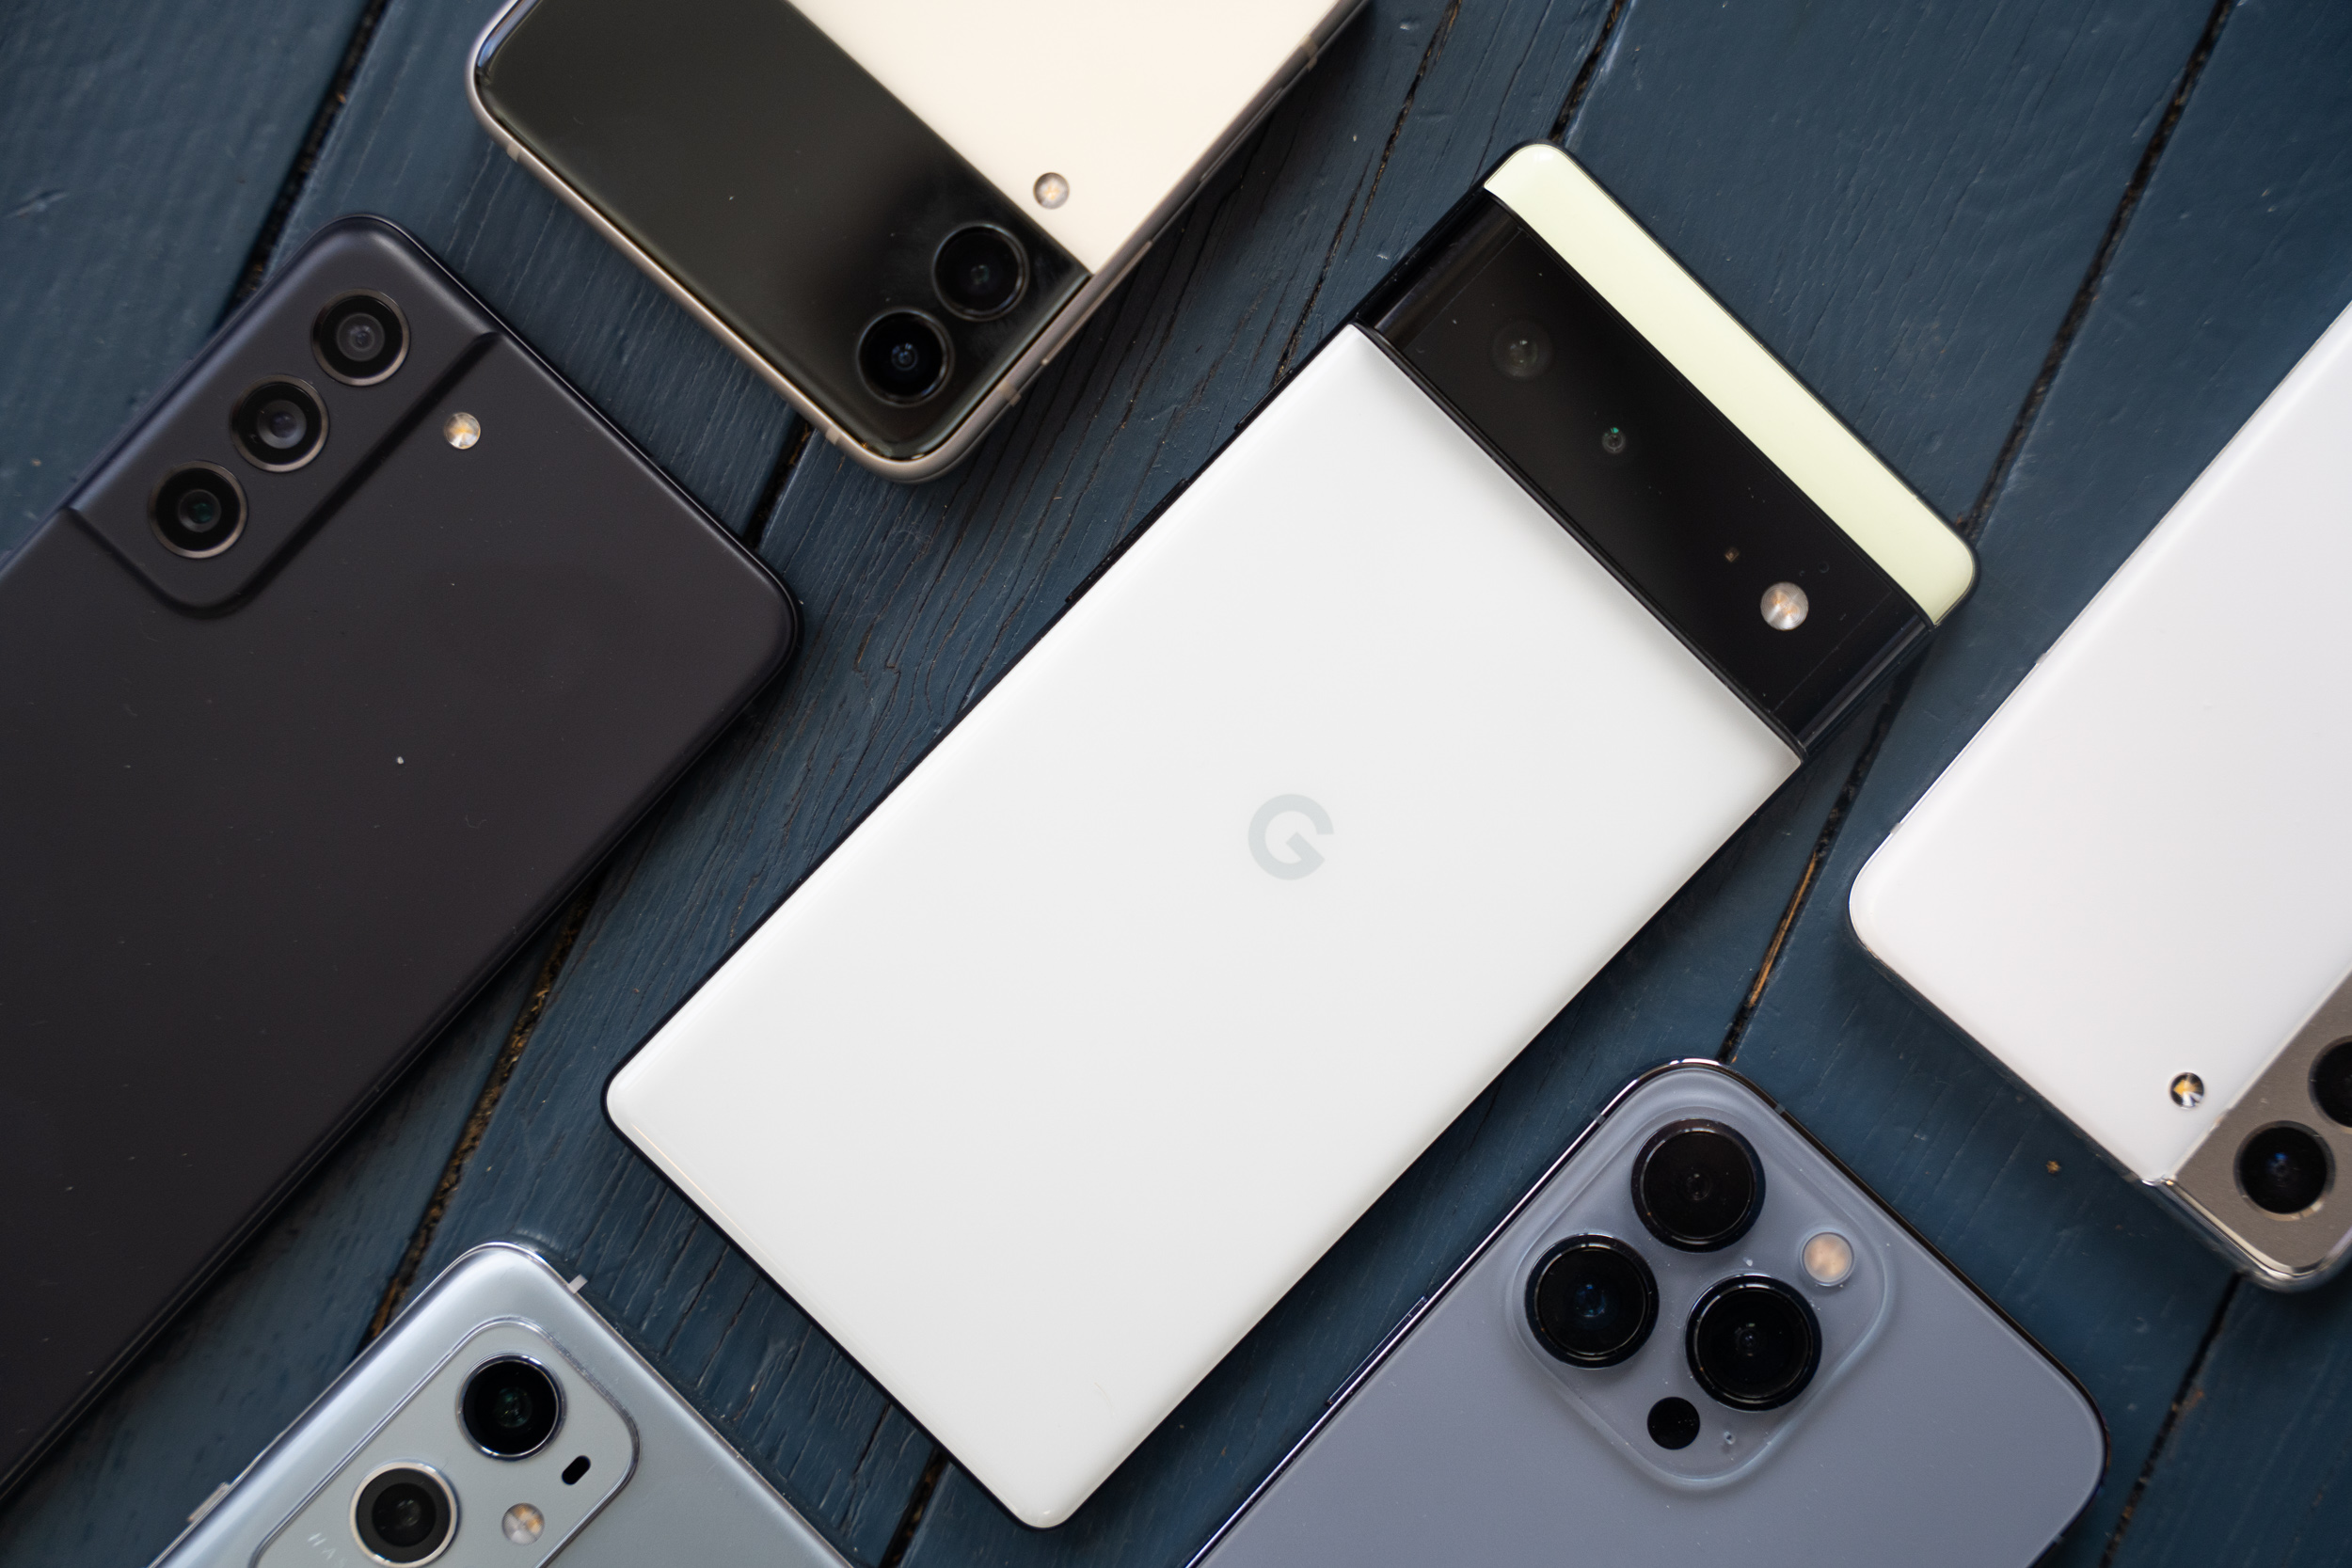 Google Pixel 5 review: an affordable flagship with some compromises